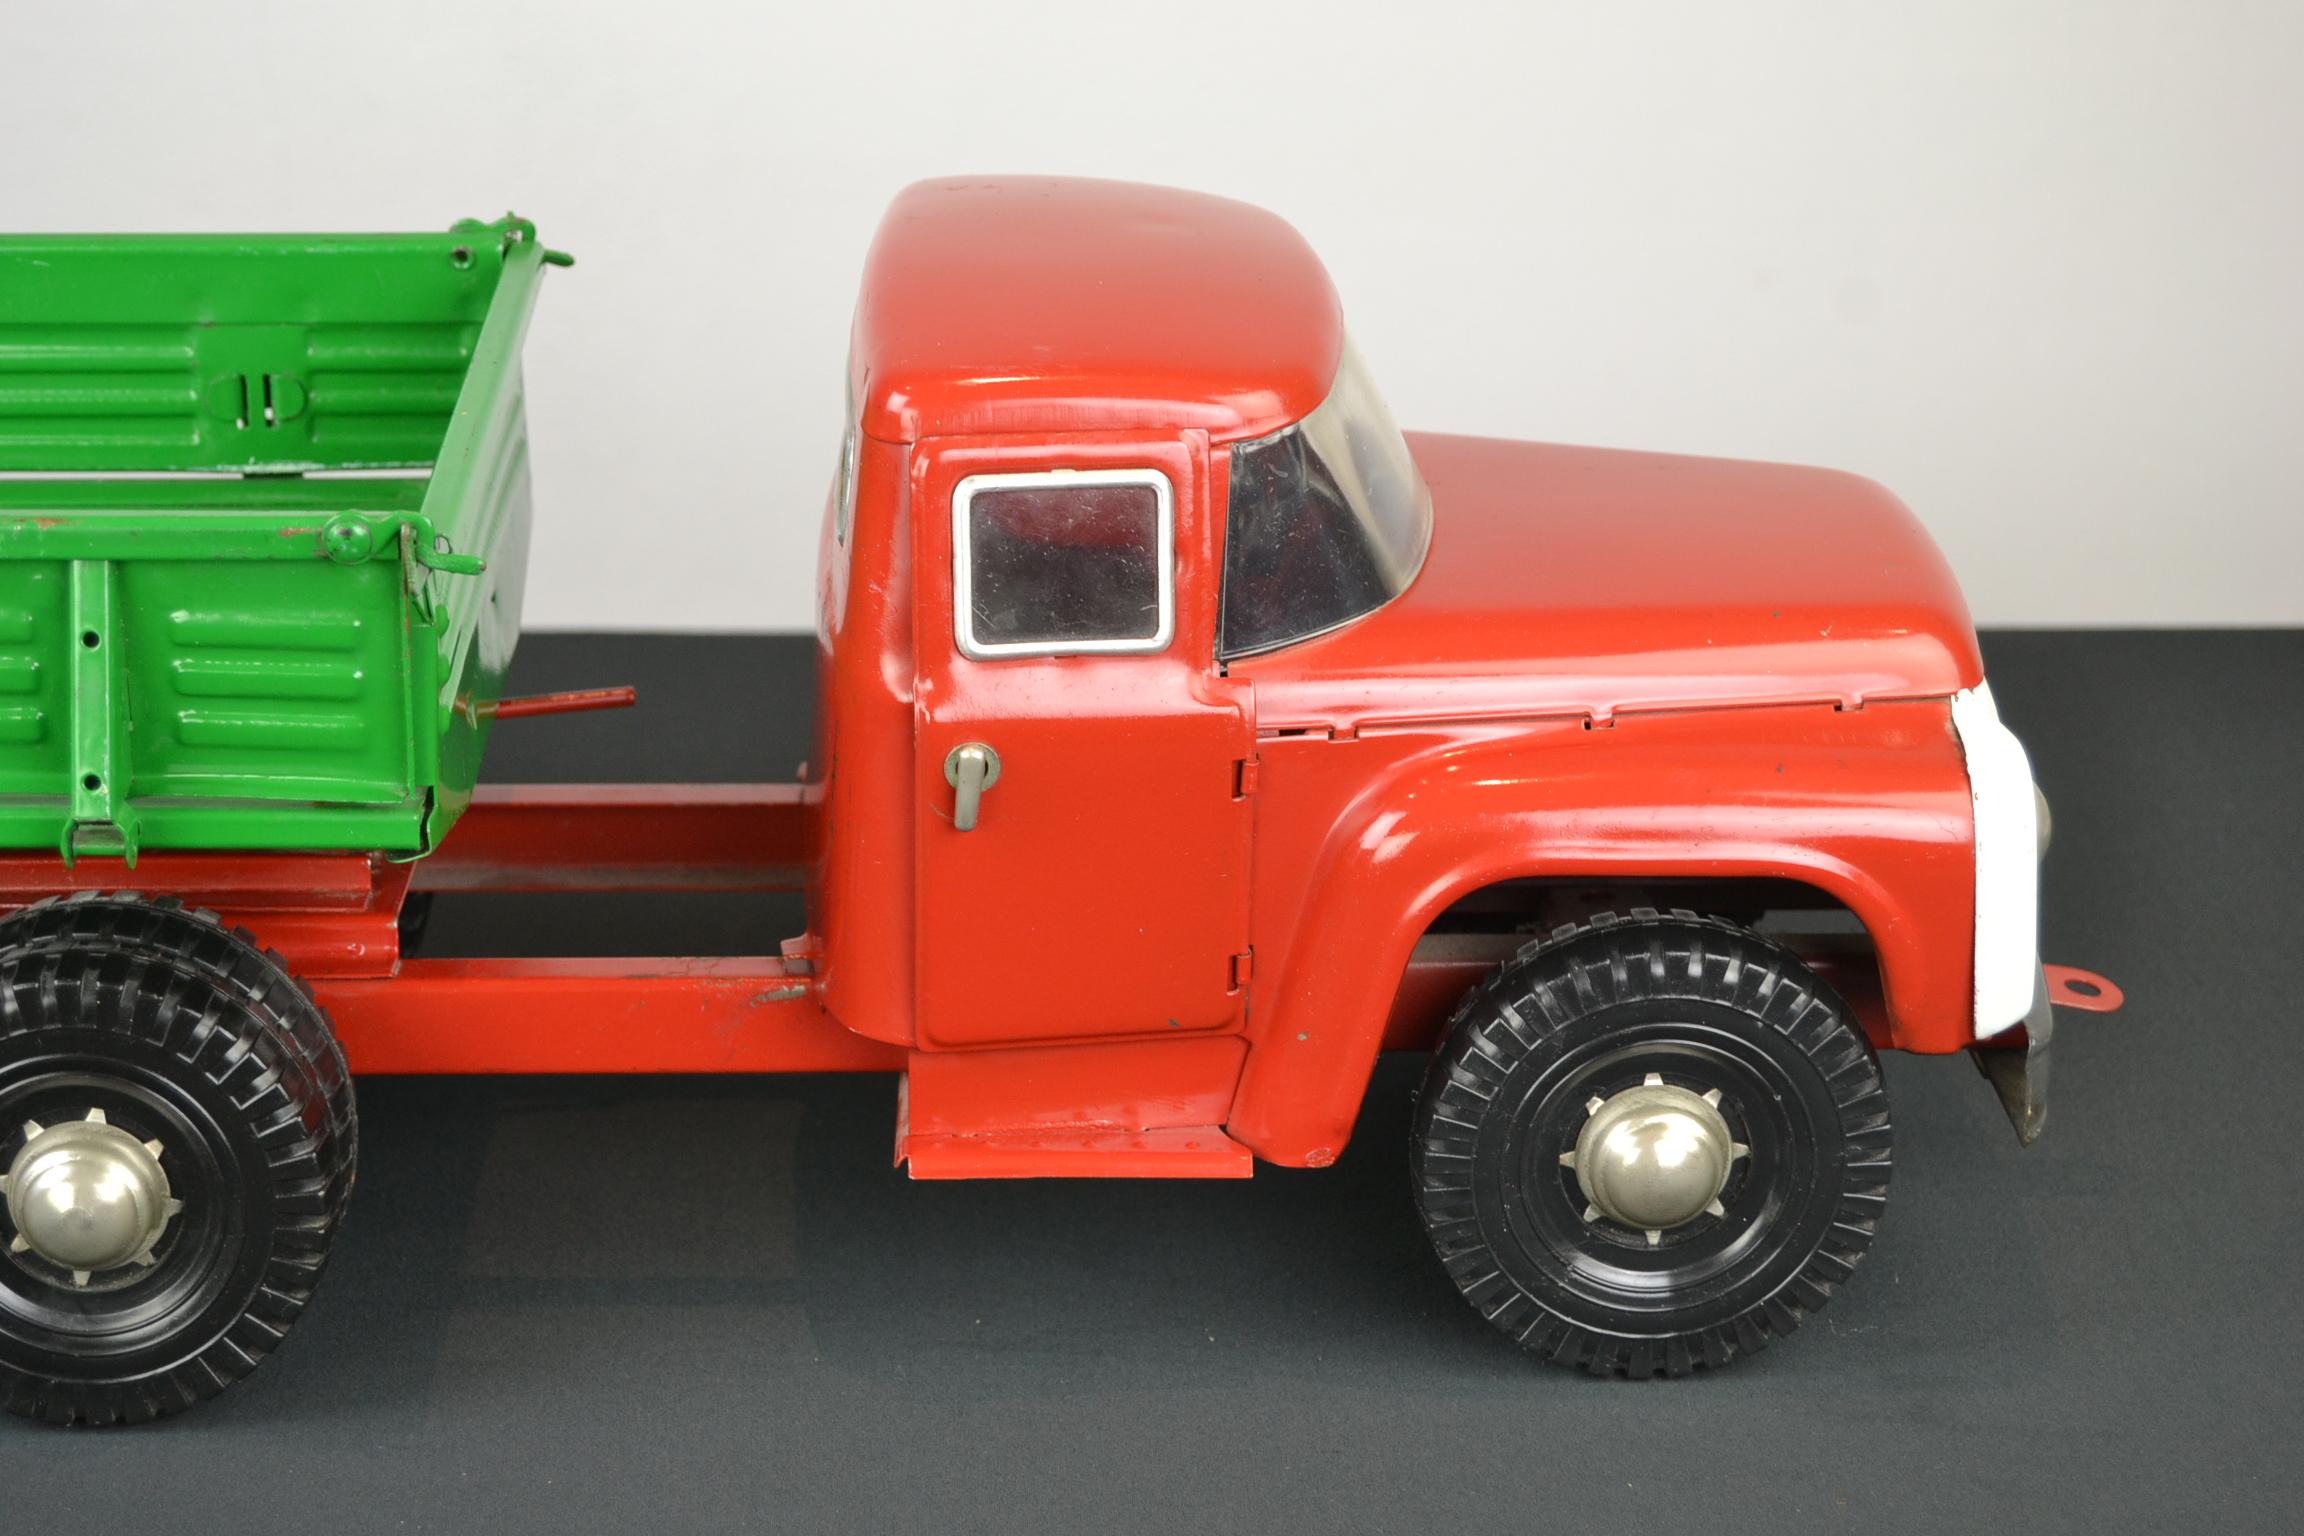 metal truck and trailer toy